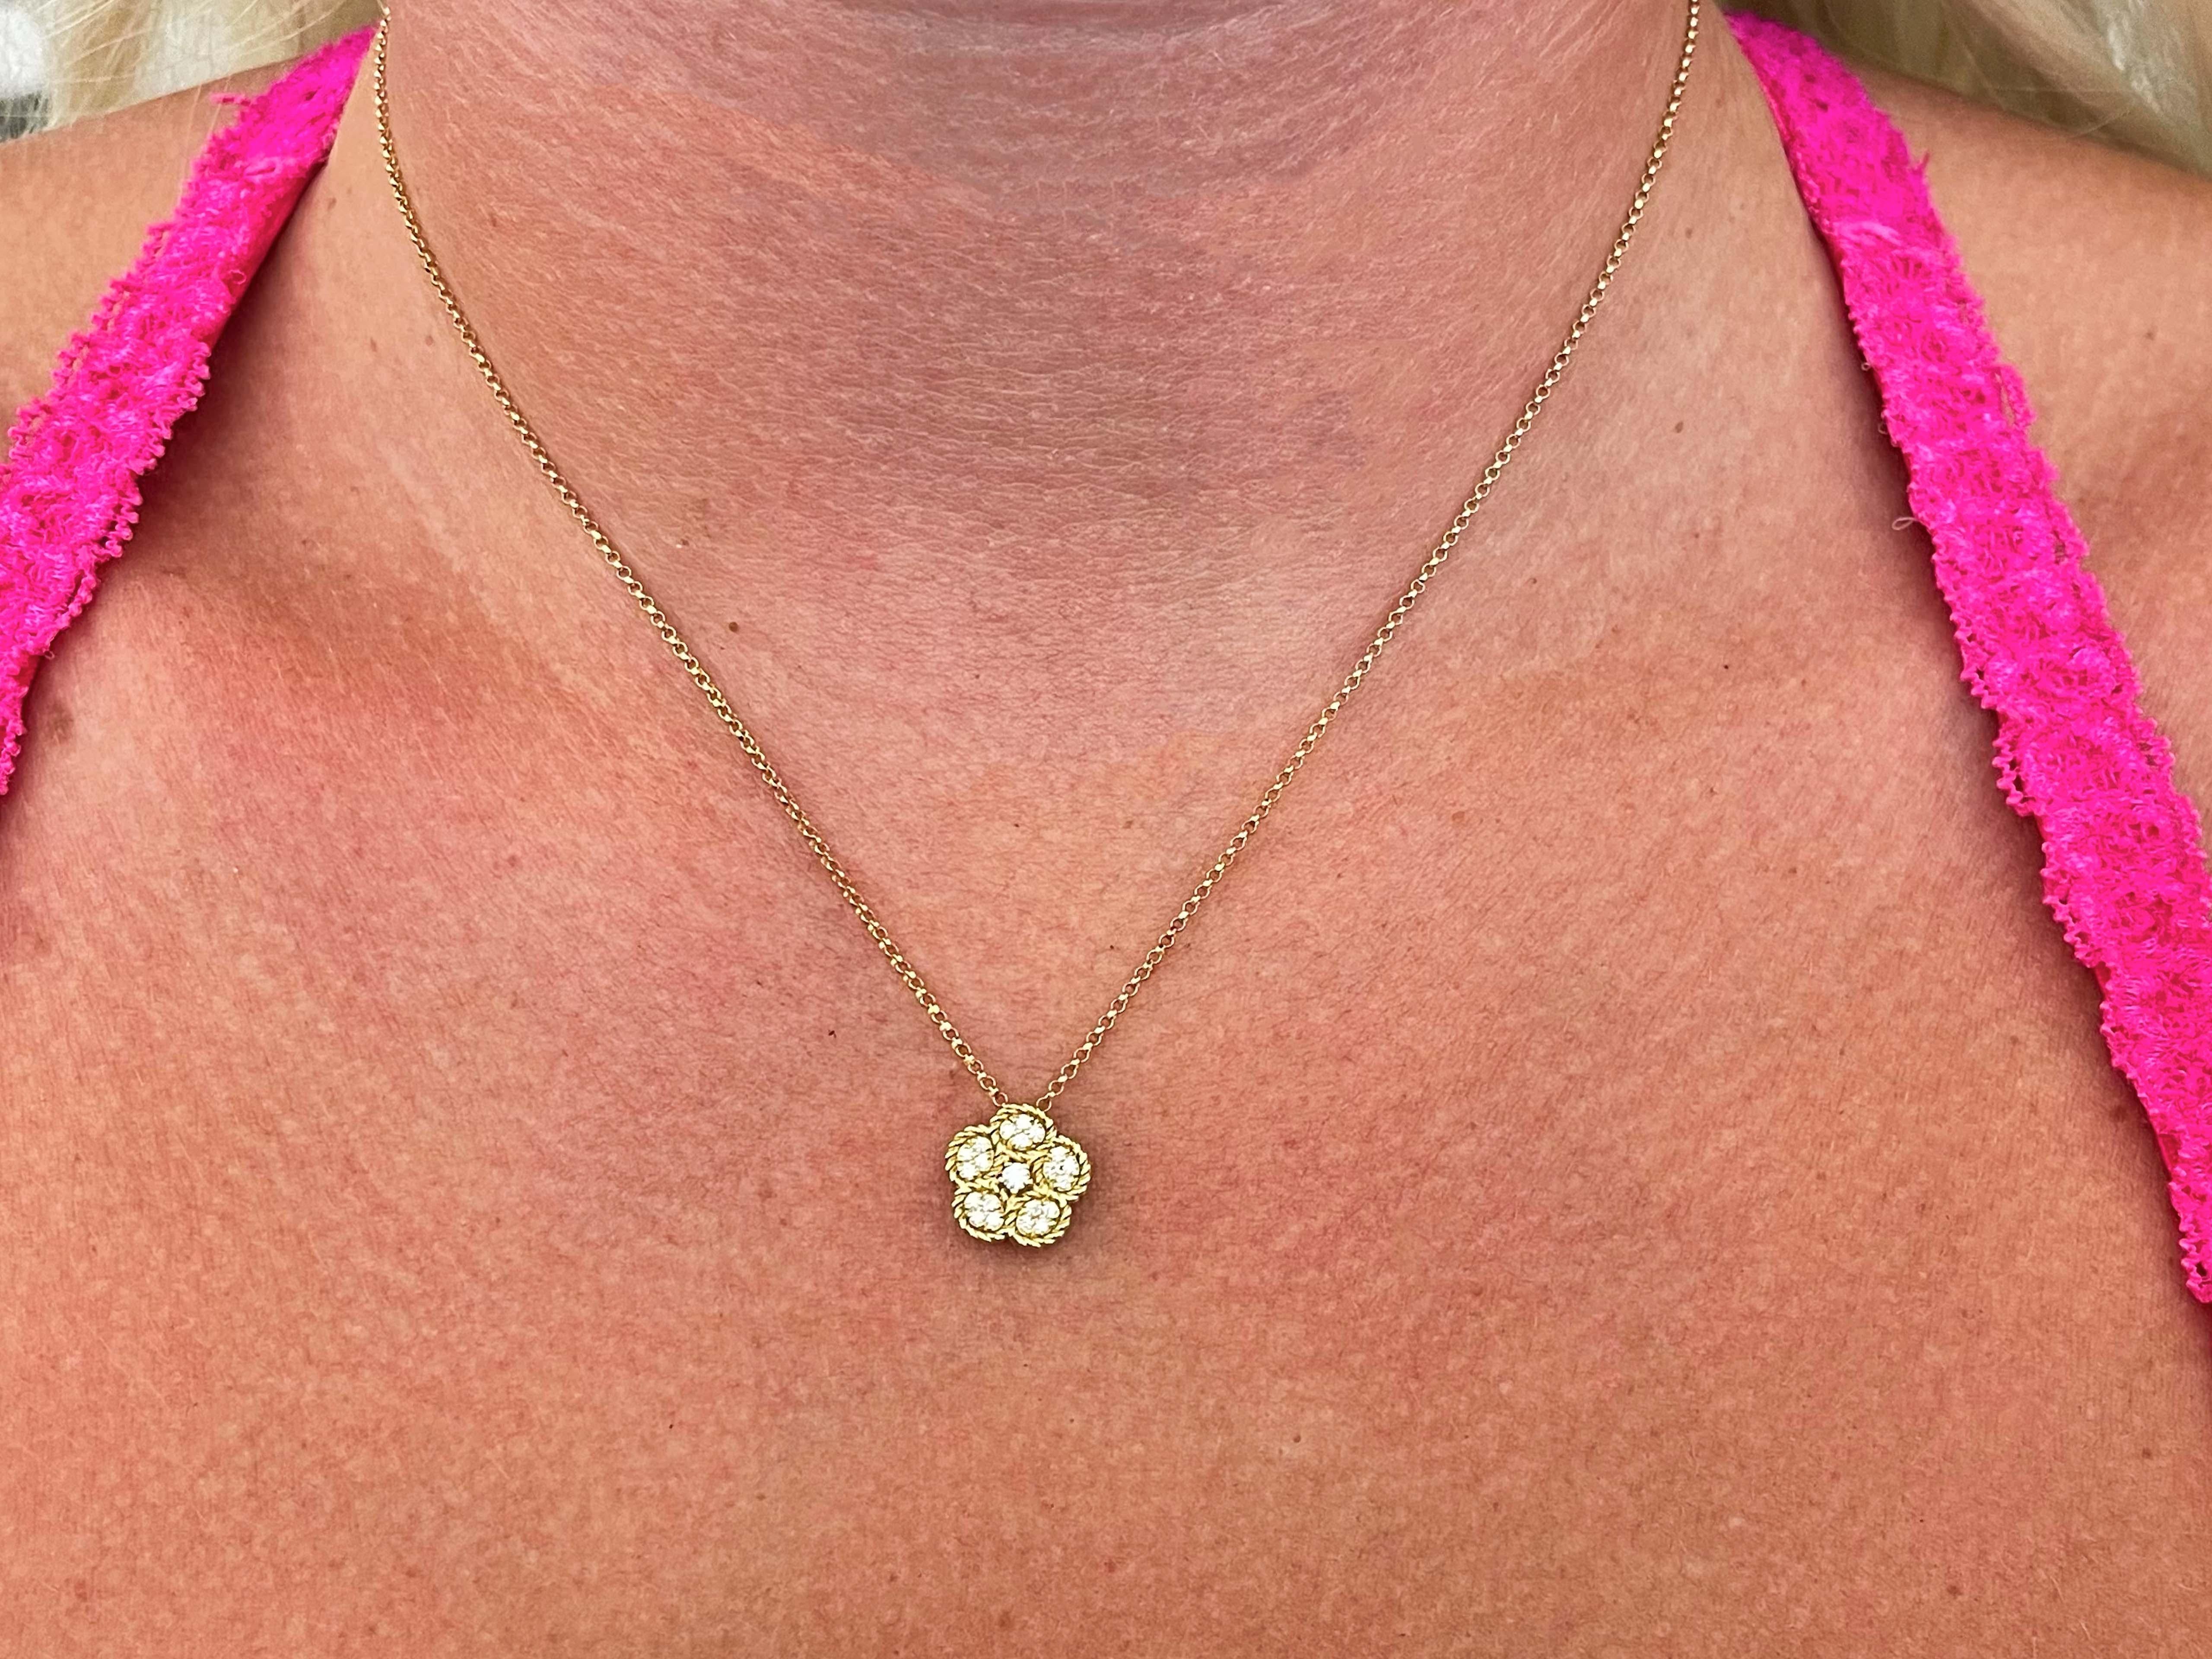 Item Specifications:
​
​Designer: Roberto Coin

Necklace Metal: 18k Yellow Gold

Total Weight: 4.8 Grams

Diamond Color: G

Diamond Clarity: VS

Diamond Carat Weight: 0.18

Diamond Count: 21 round brilliant cut

Chain Length: 16